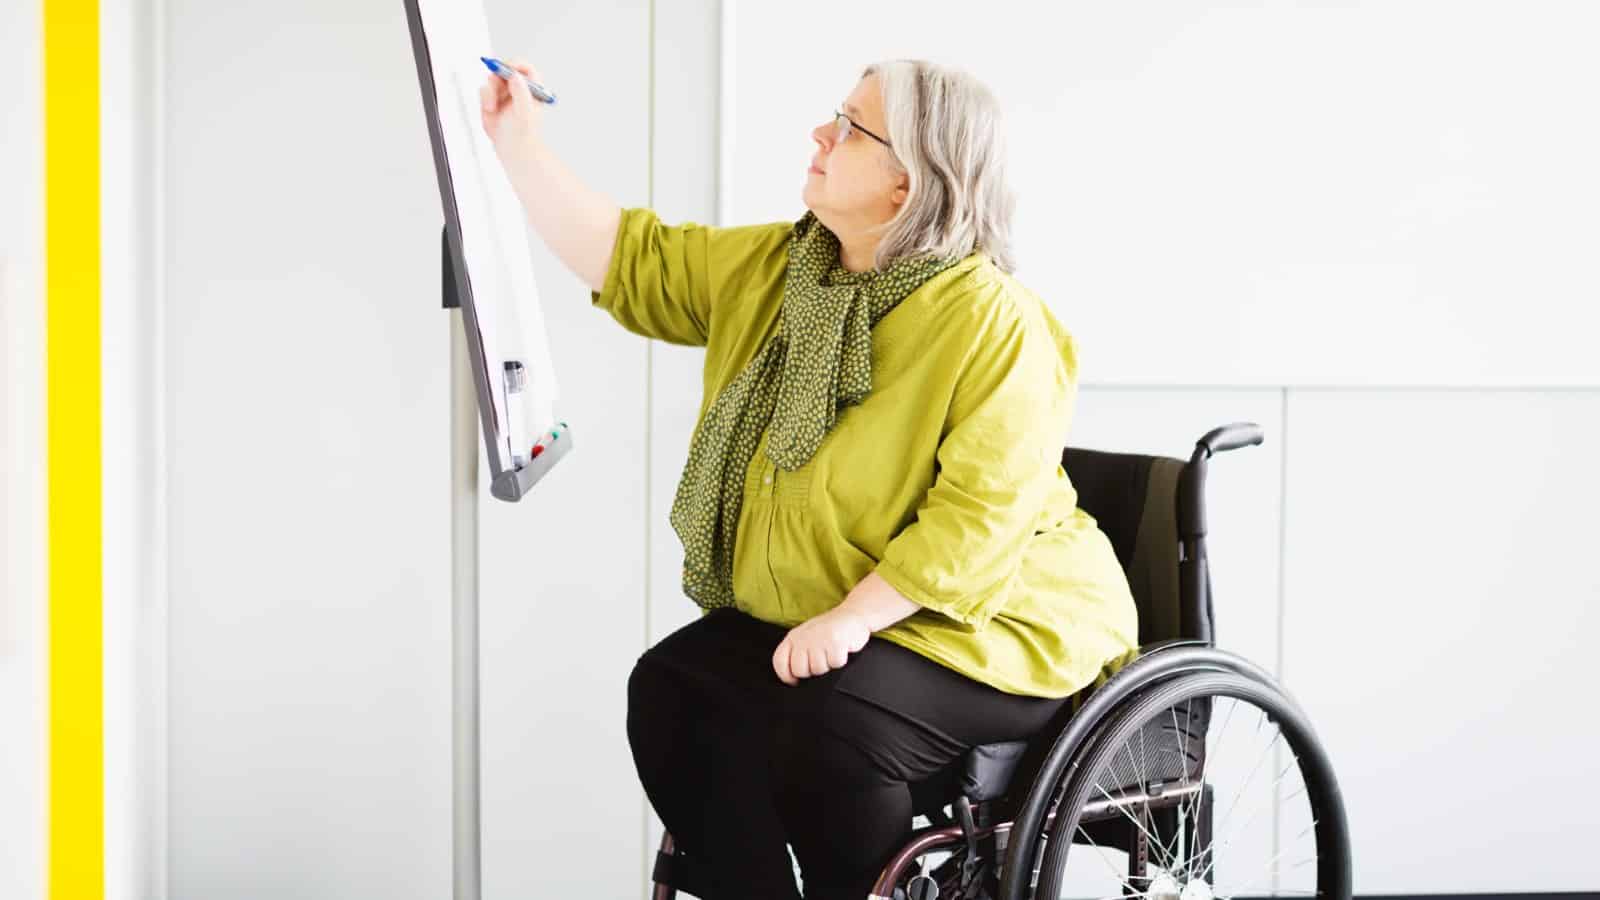 Middle-aged lady in wheelchair writing on whiteboard